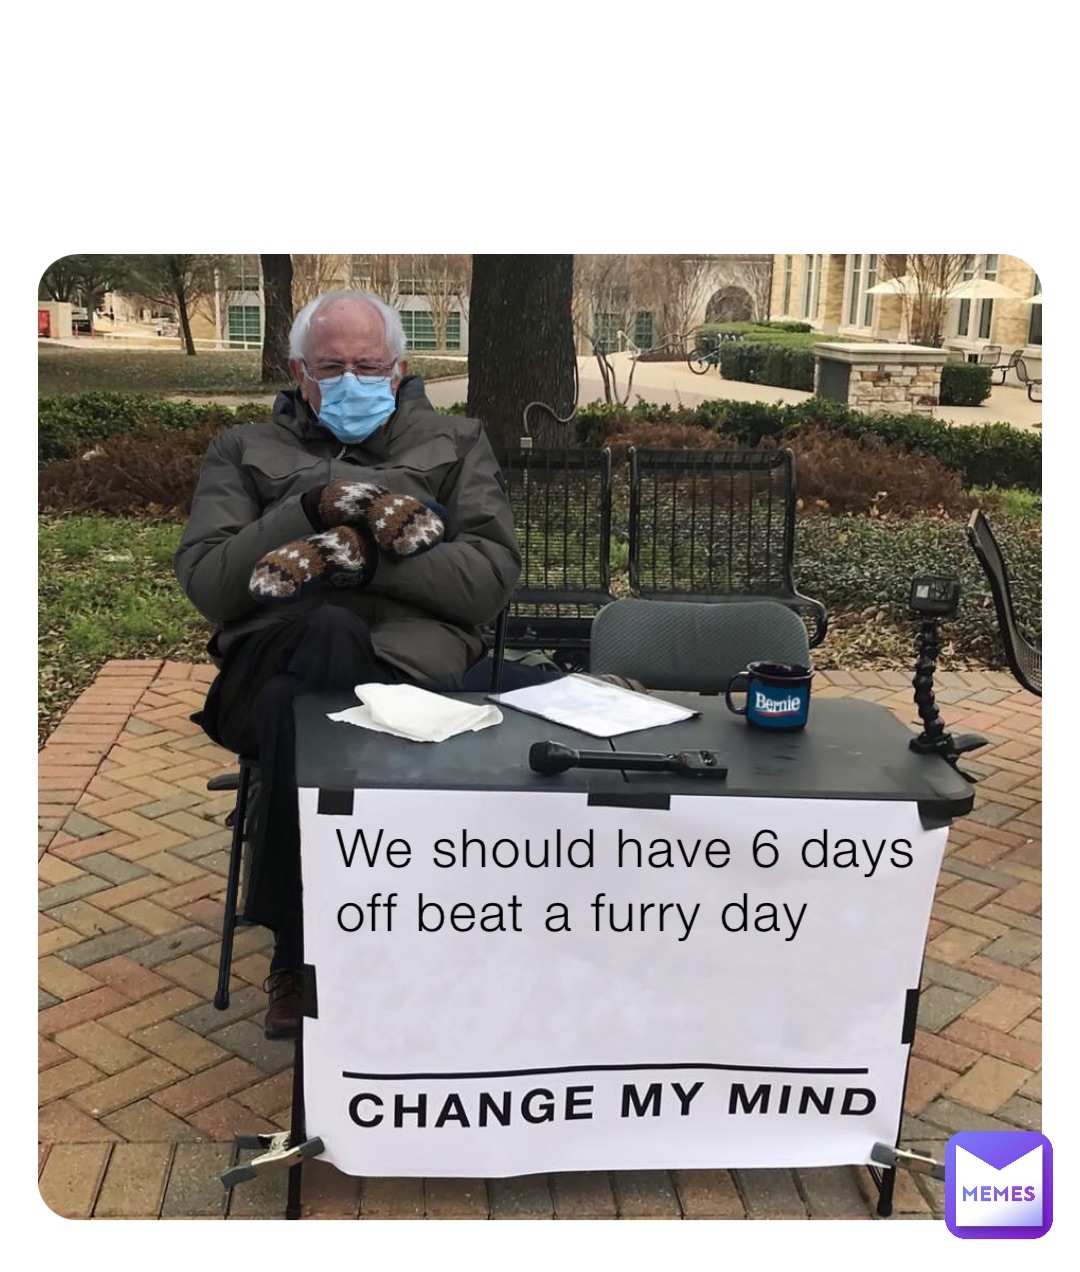 We should have 6 days off beat a furry day